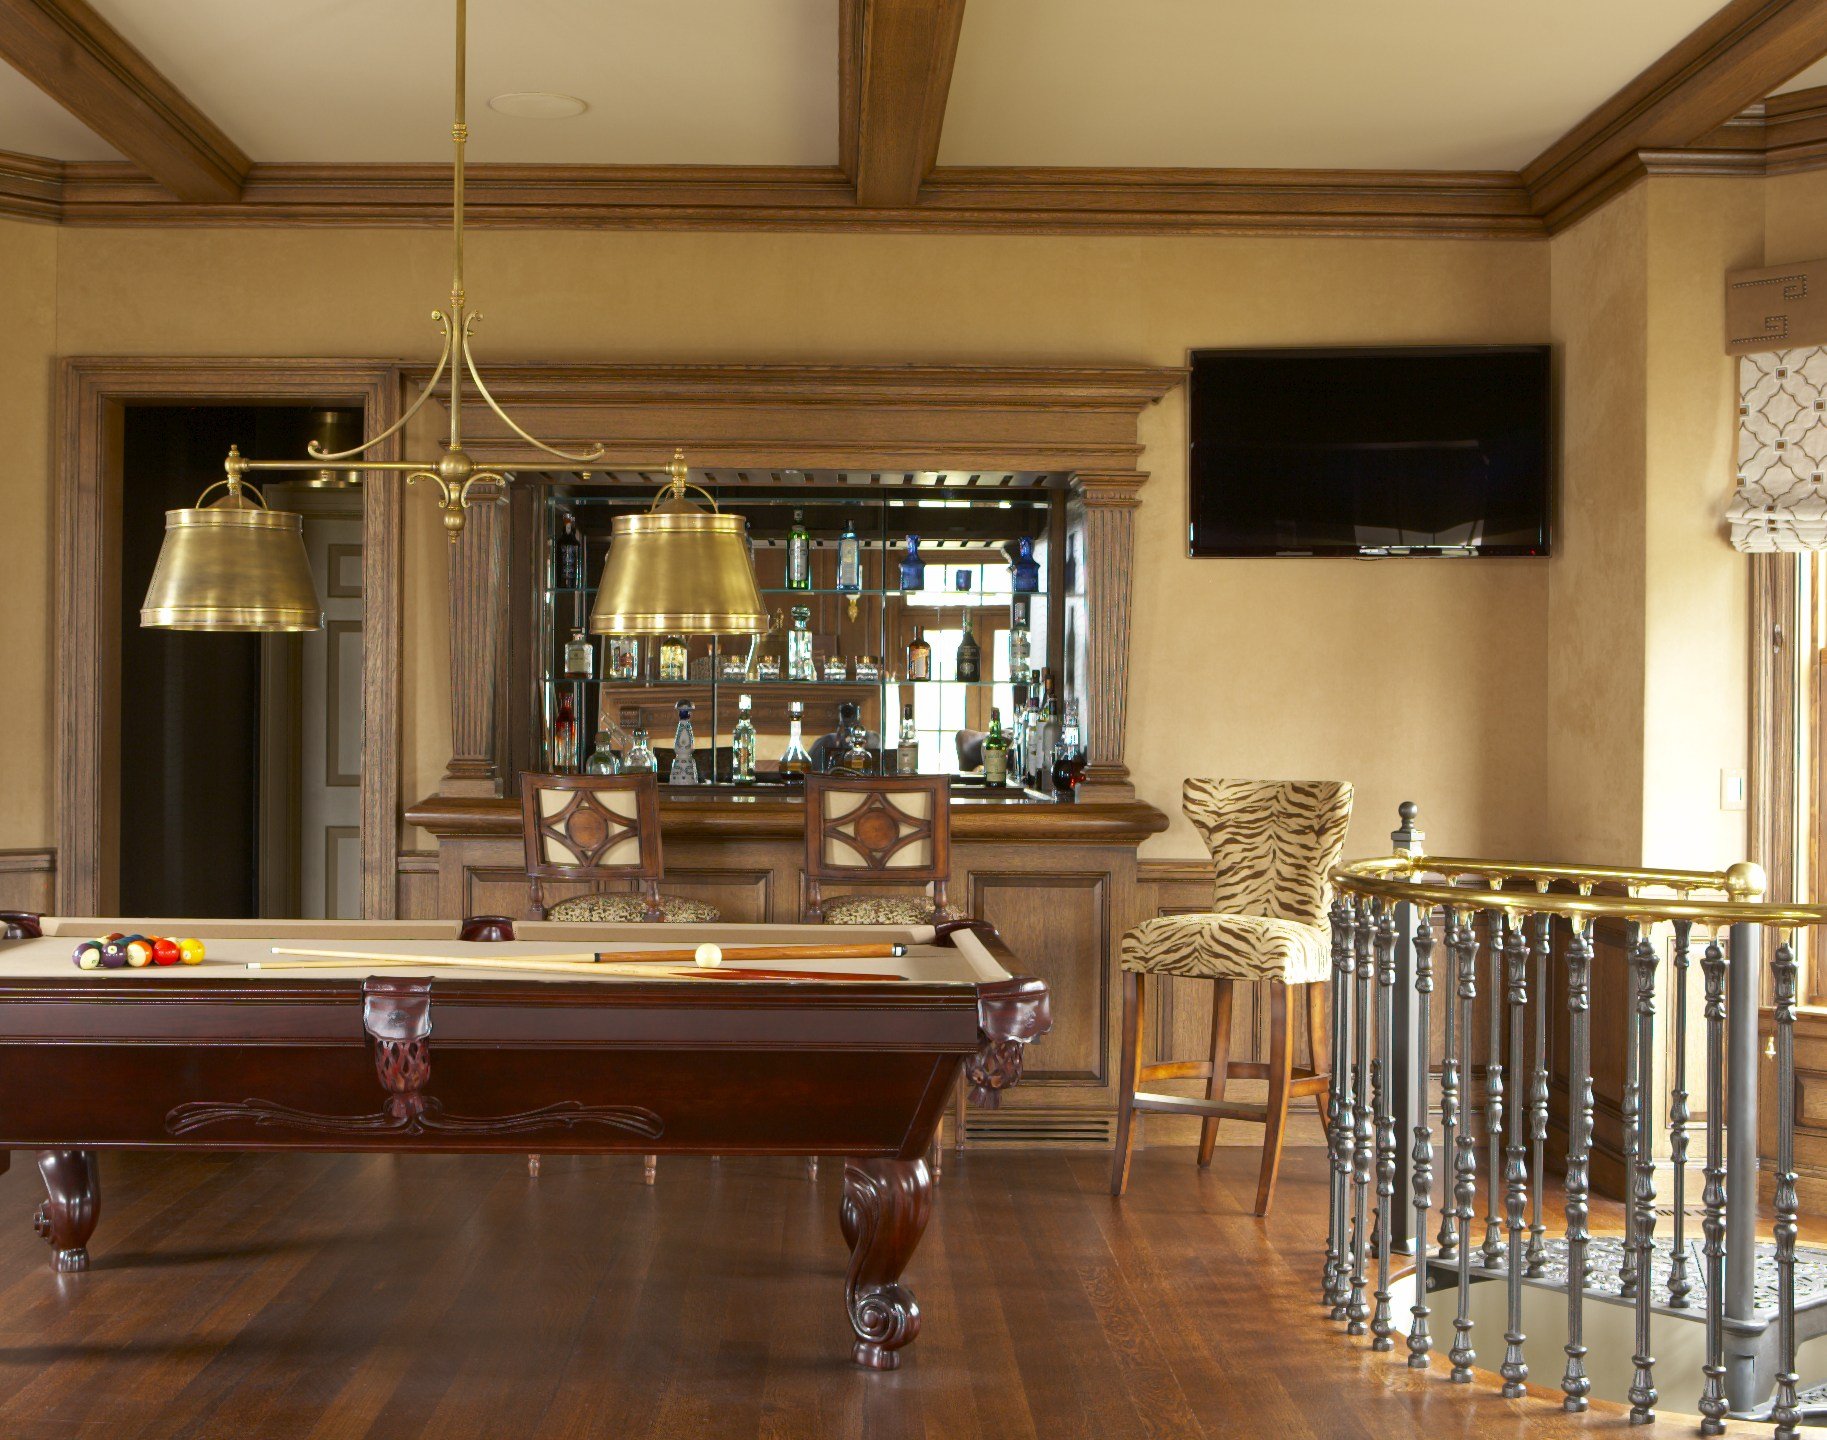 11-pool-table-bar-game-room-elegant-wood-transitional-colonial-greenwich-connecticut.jpg